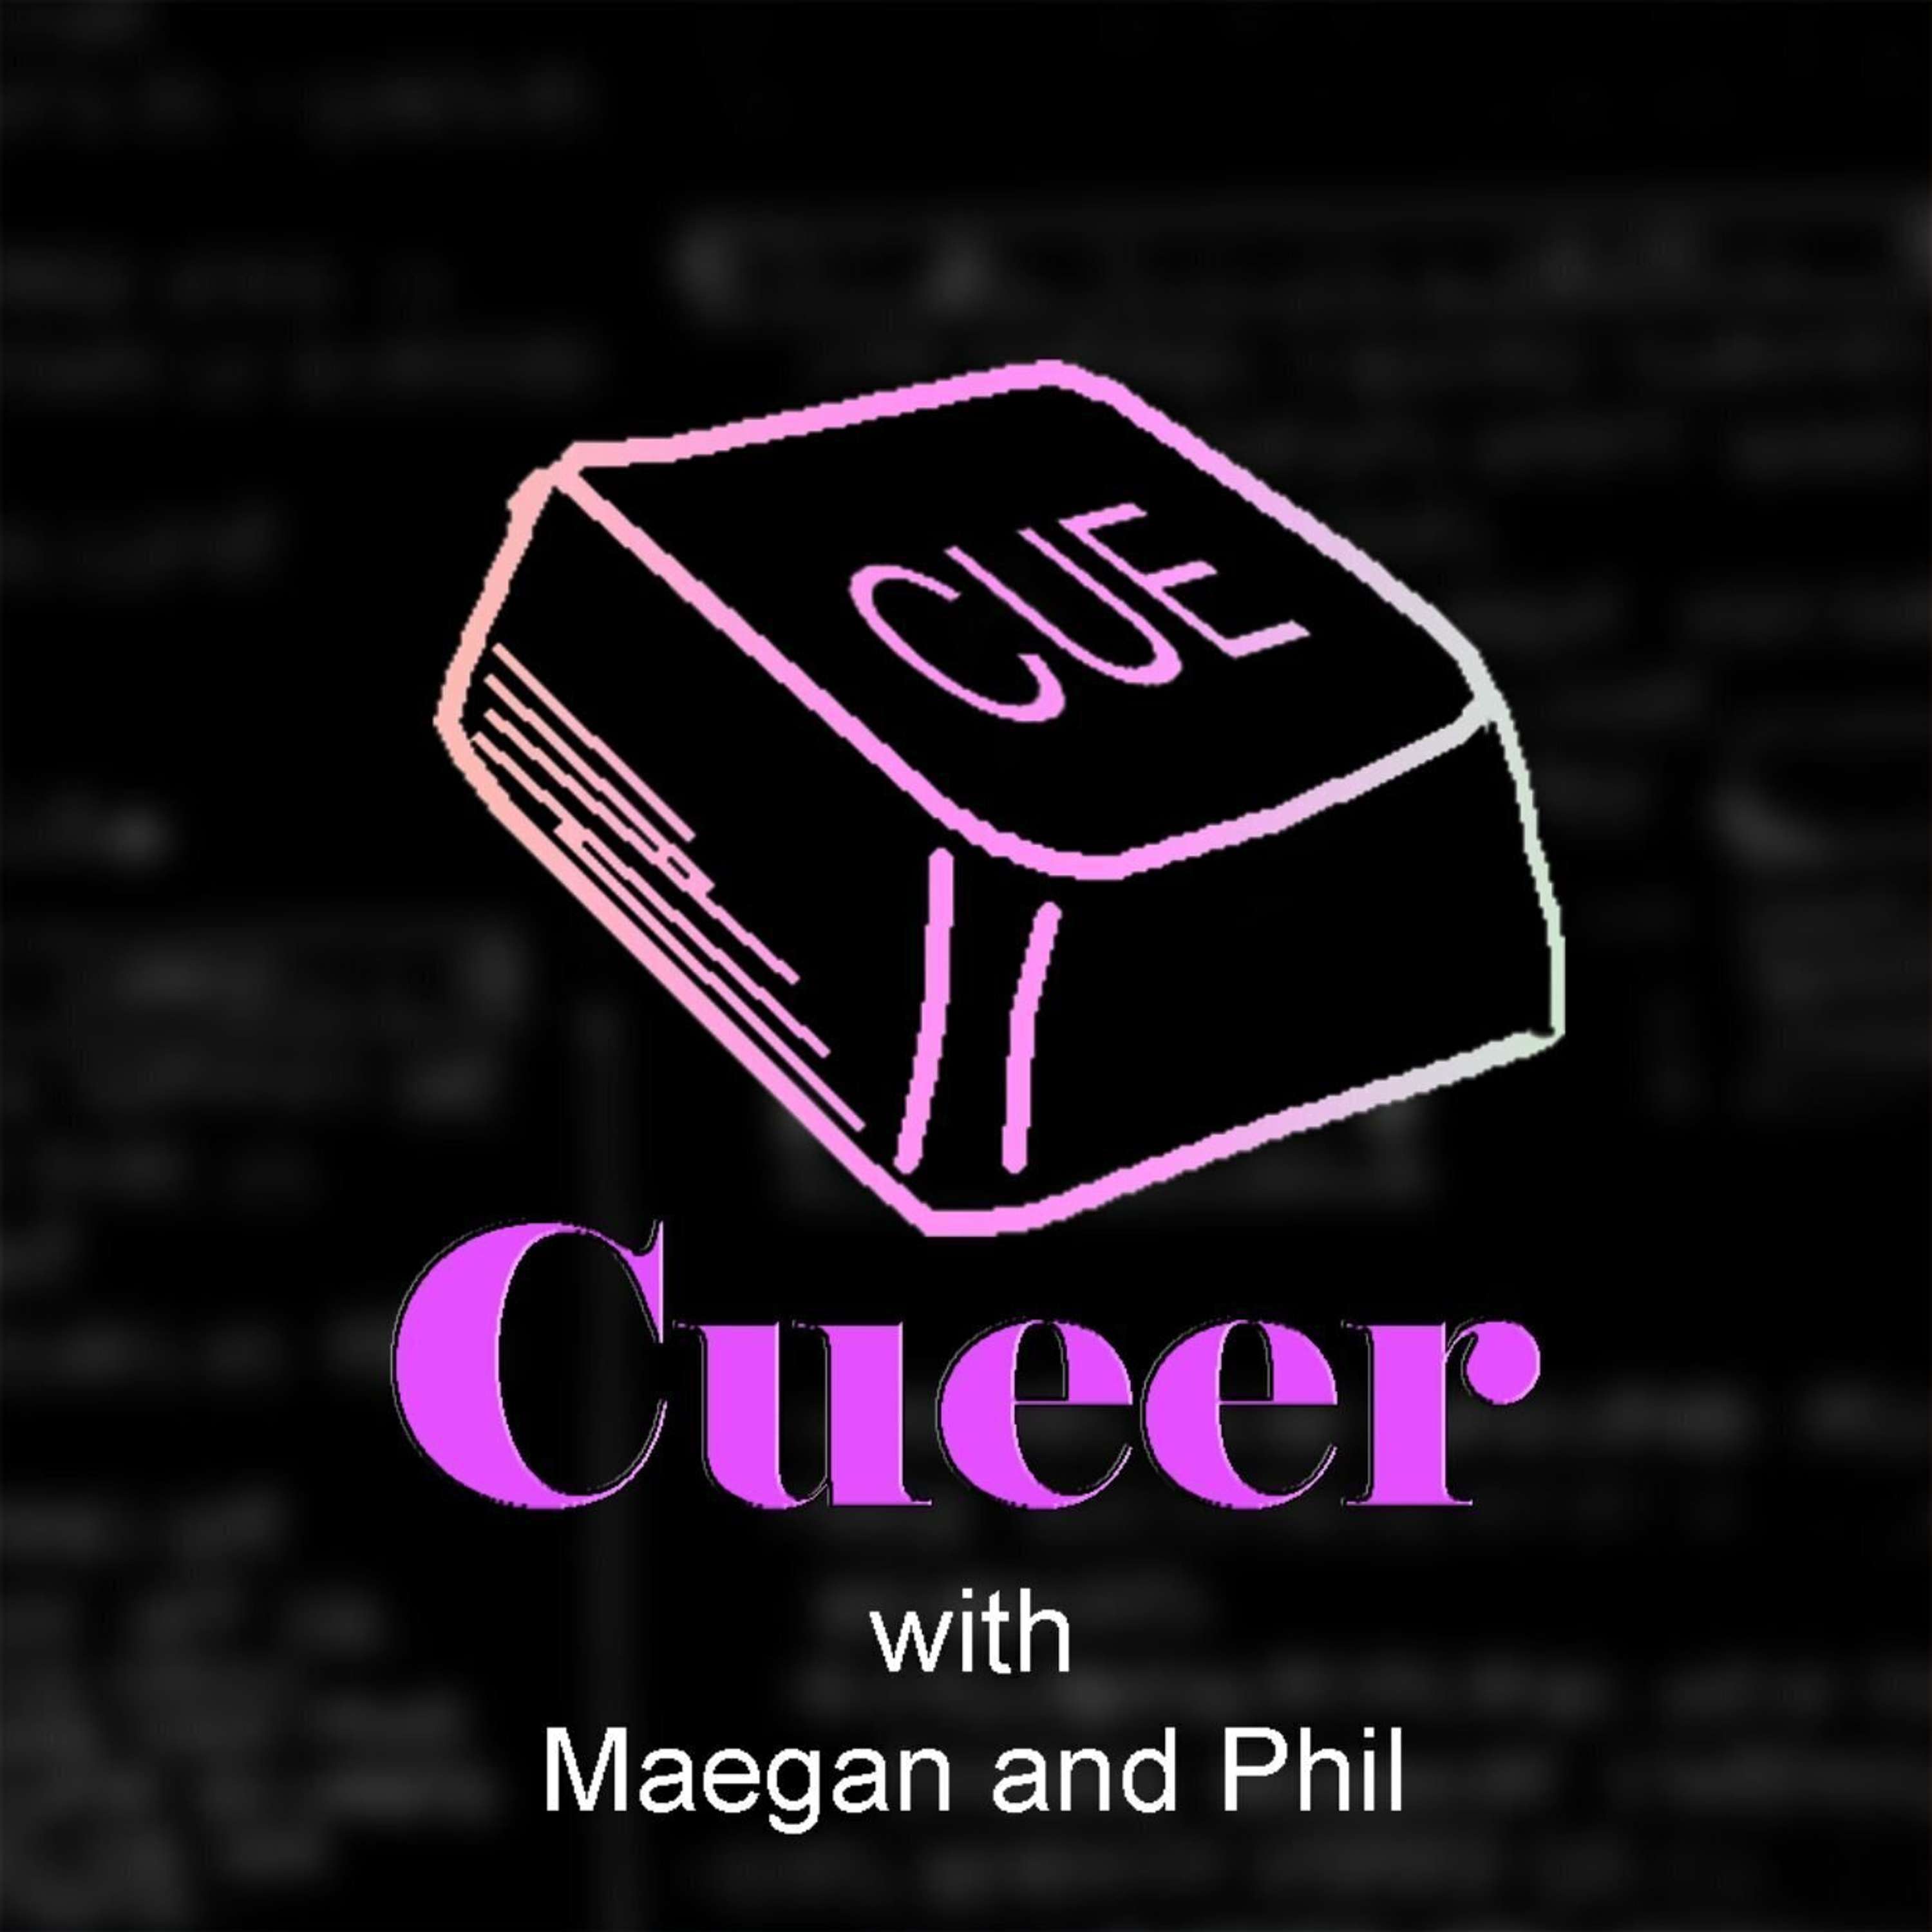 Cueer: An LGBTQA Live Entertainment Discussion